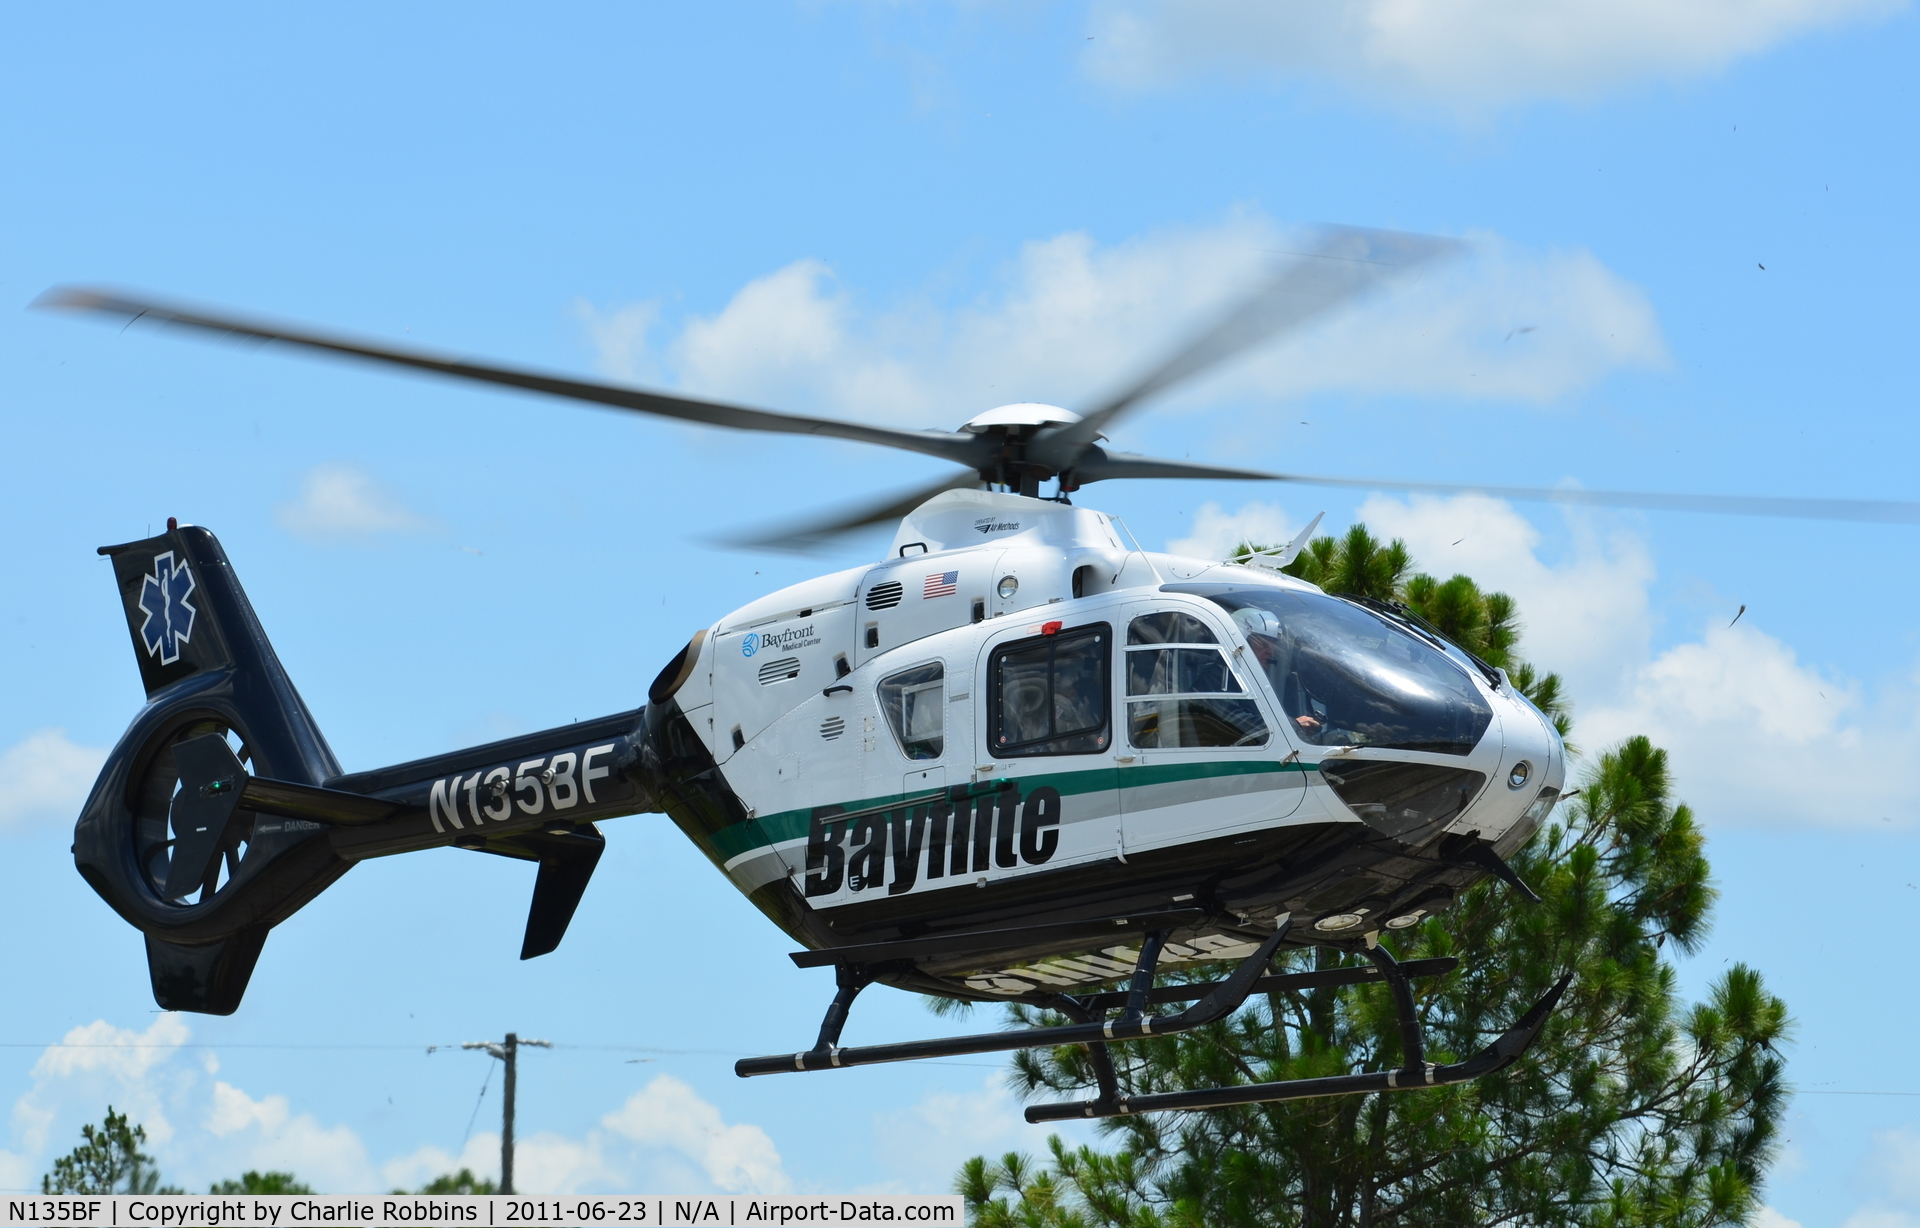 N135BF, 2006 Eurocopter EC-135P-2 C/N 0490, Bayflite 2 takes off from the l/z at East 14th Street & Joel Boulevard in Lehigh Acres, FL w/ a patient en route to Health Park Hospital.